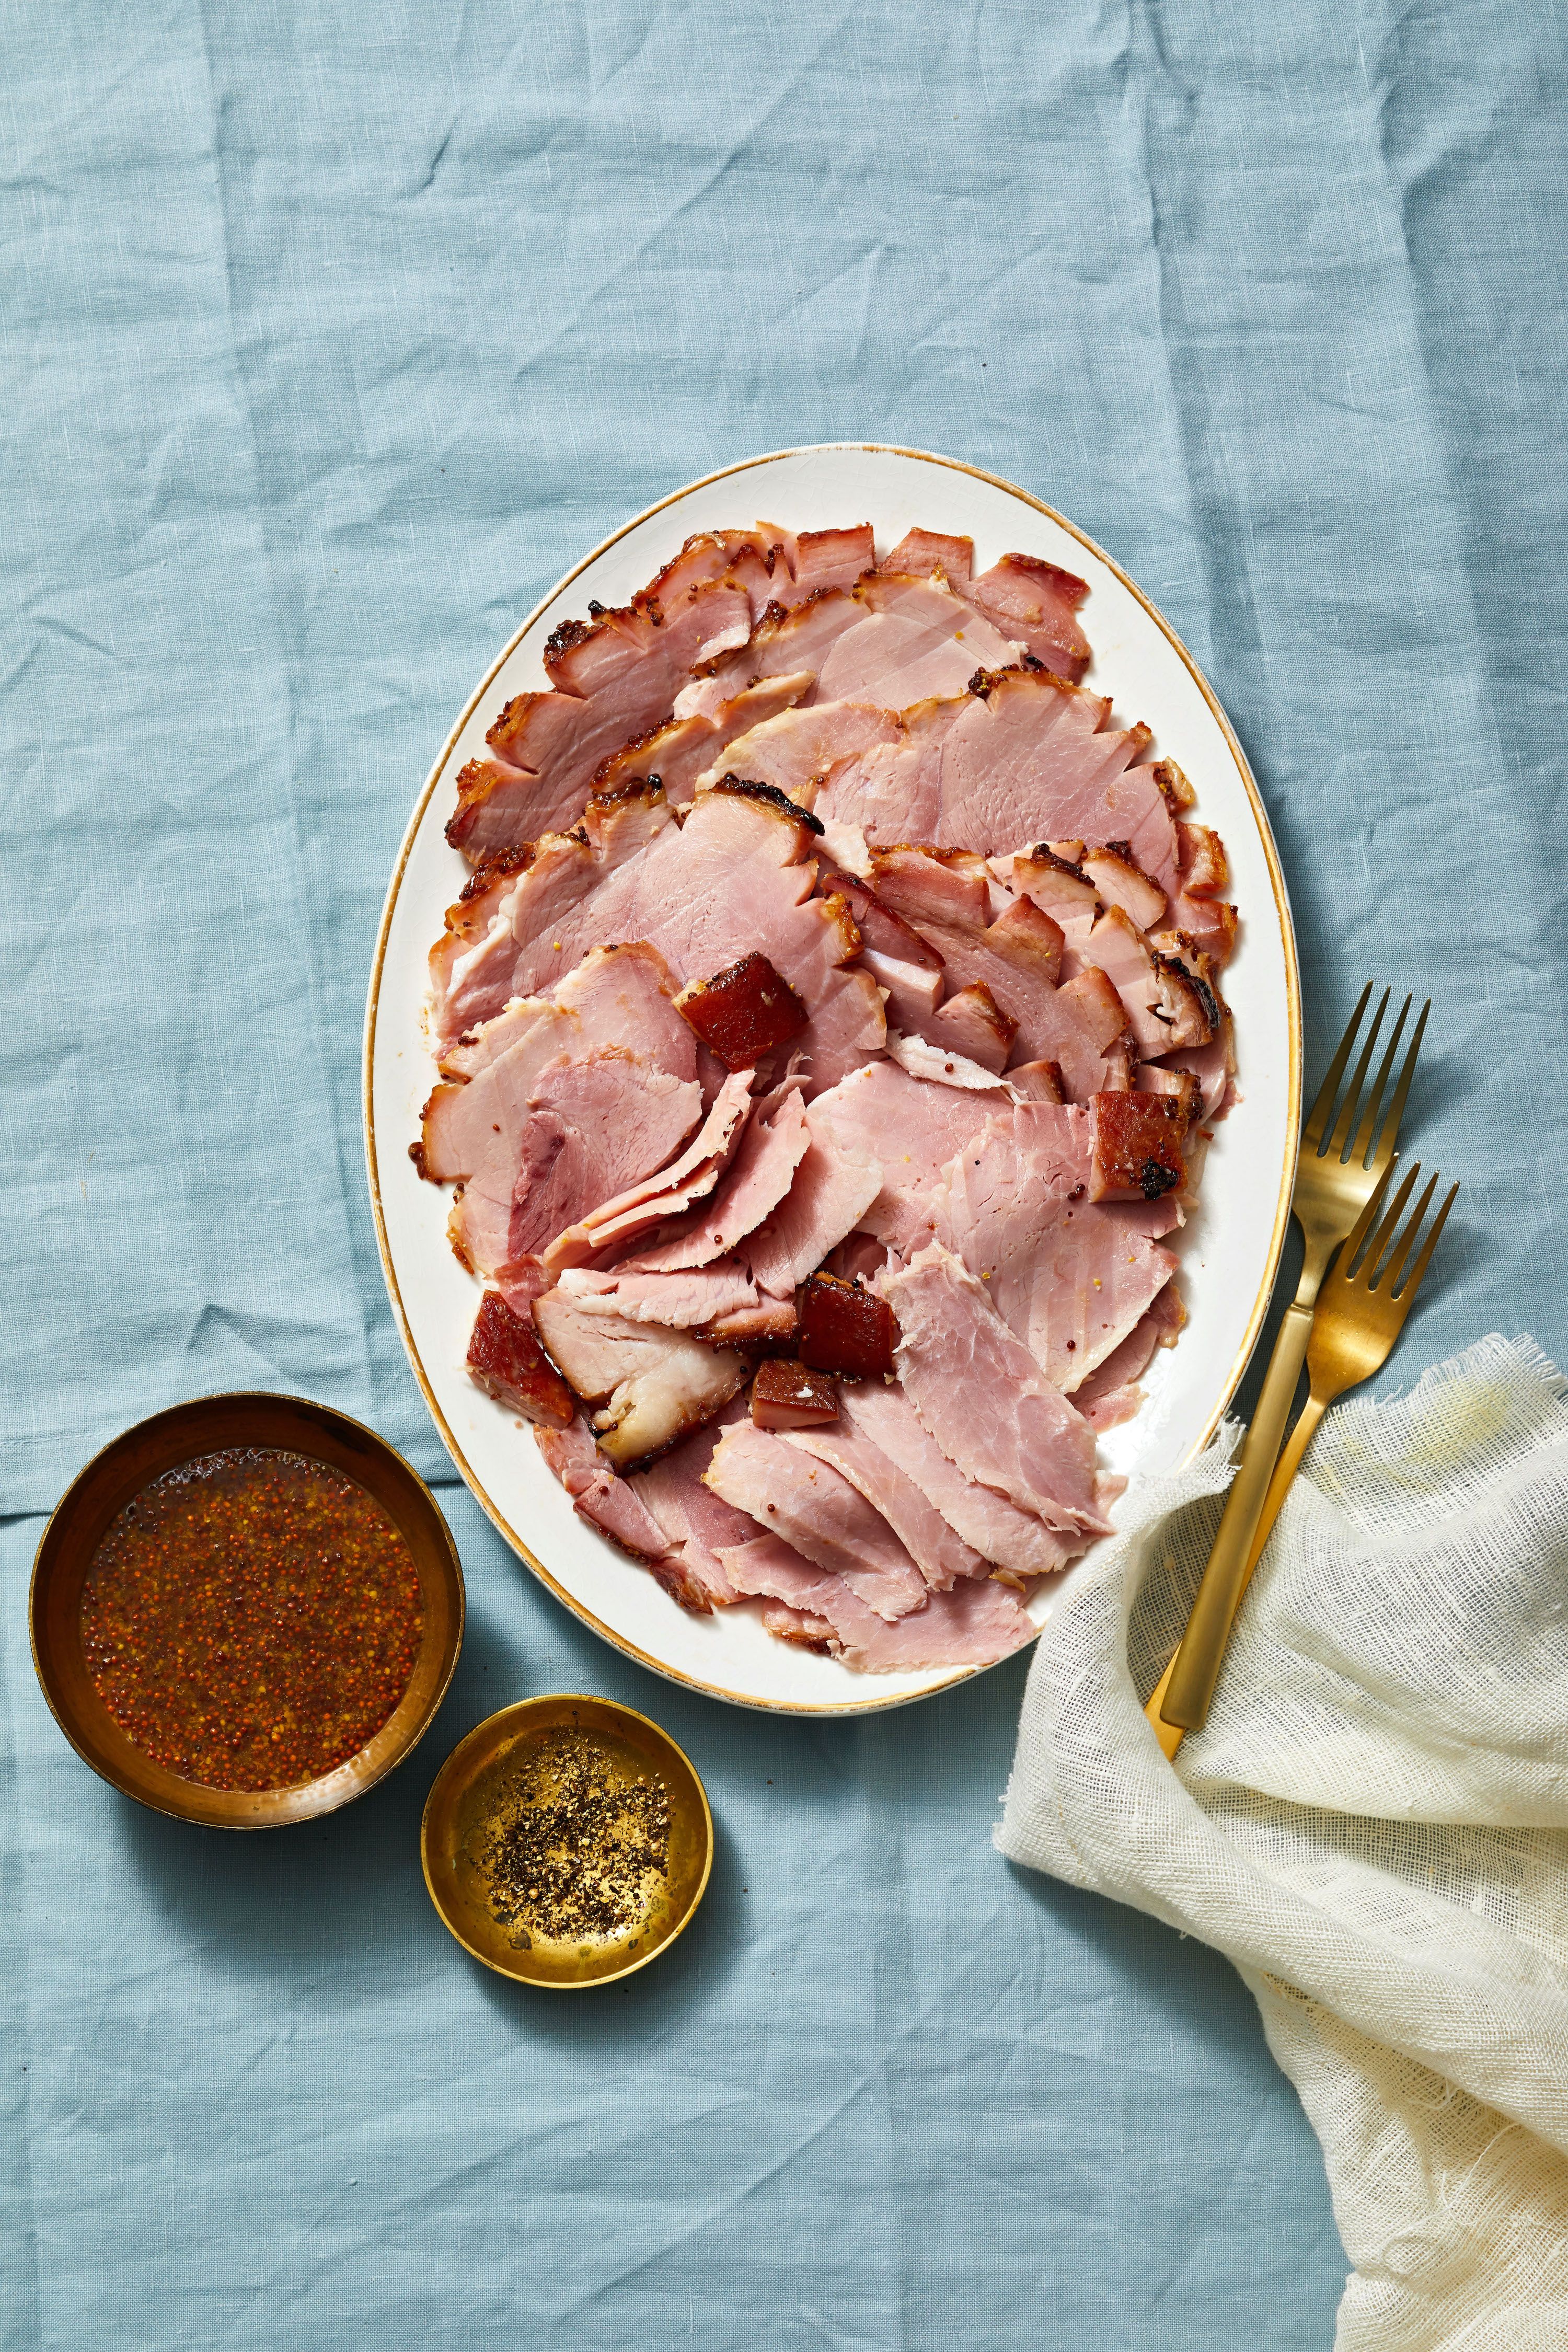 How To Bake The Best Holiday Ham - The Bottomless Pit